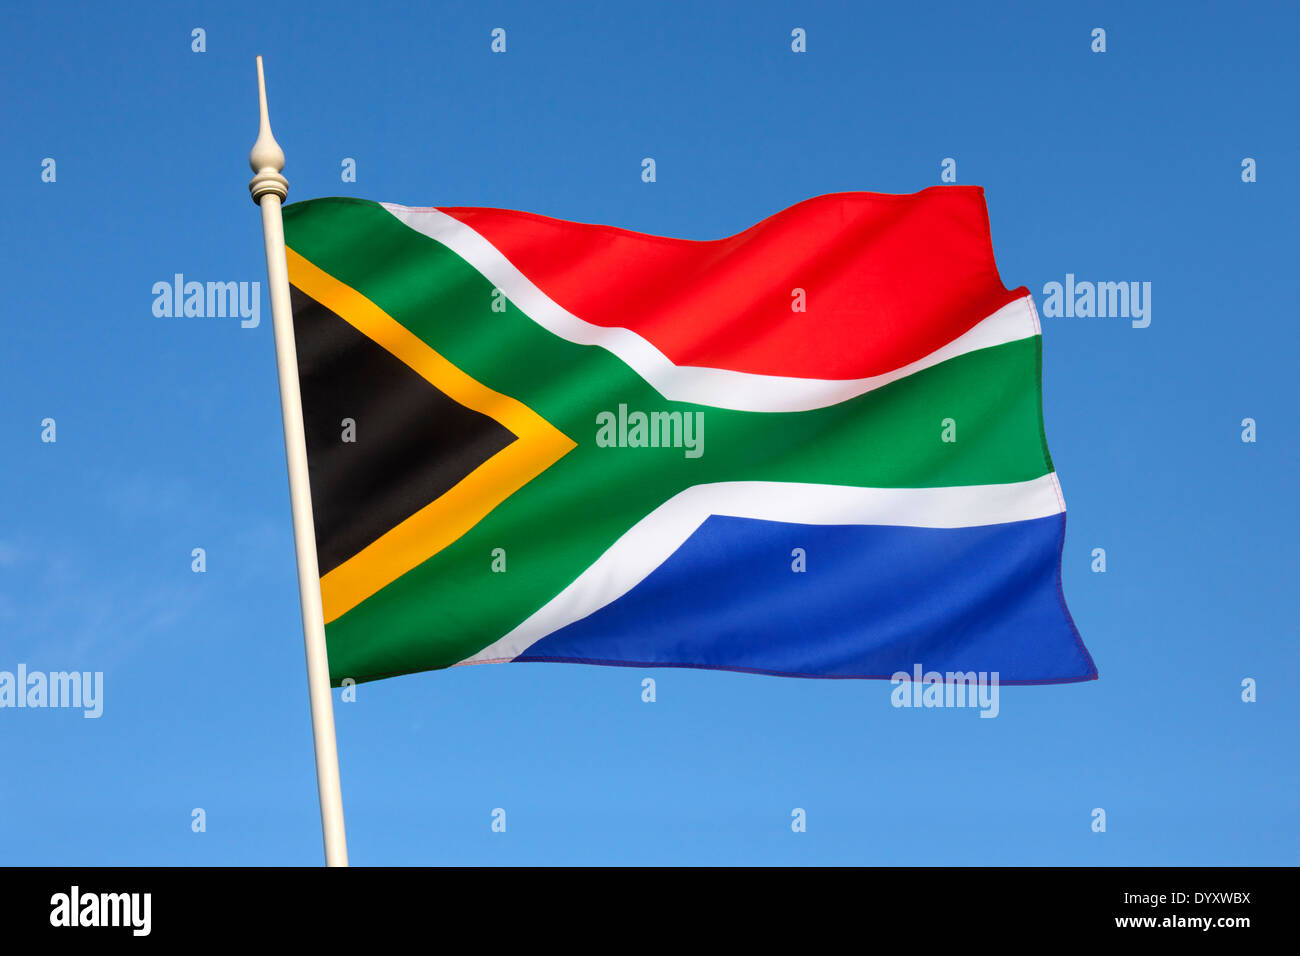 The flag of the Republic of South Africa Stock Photo